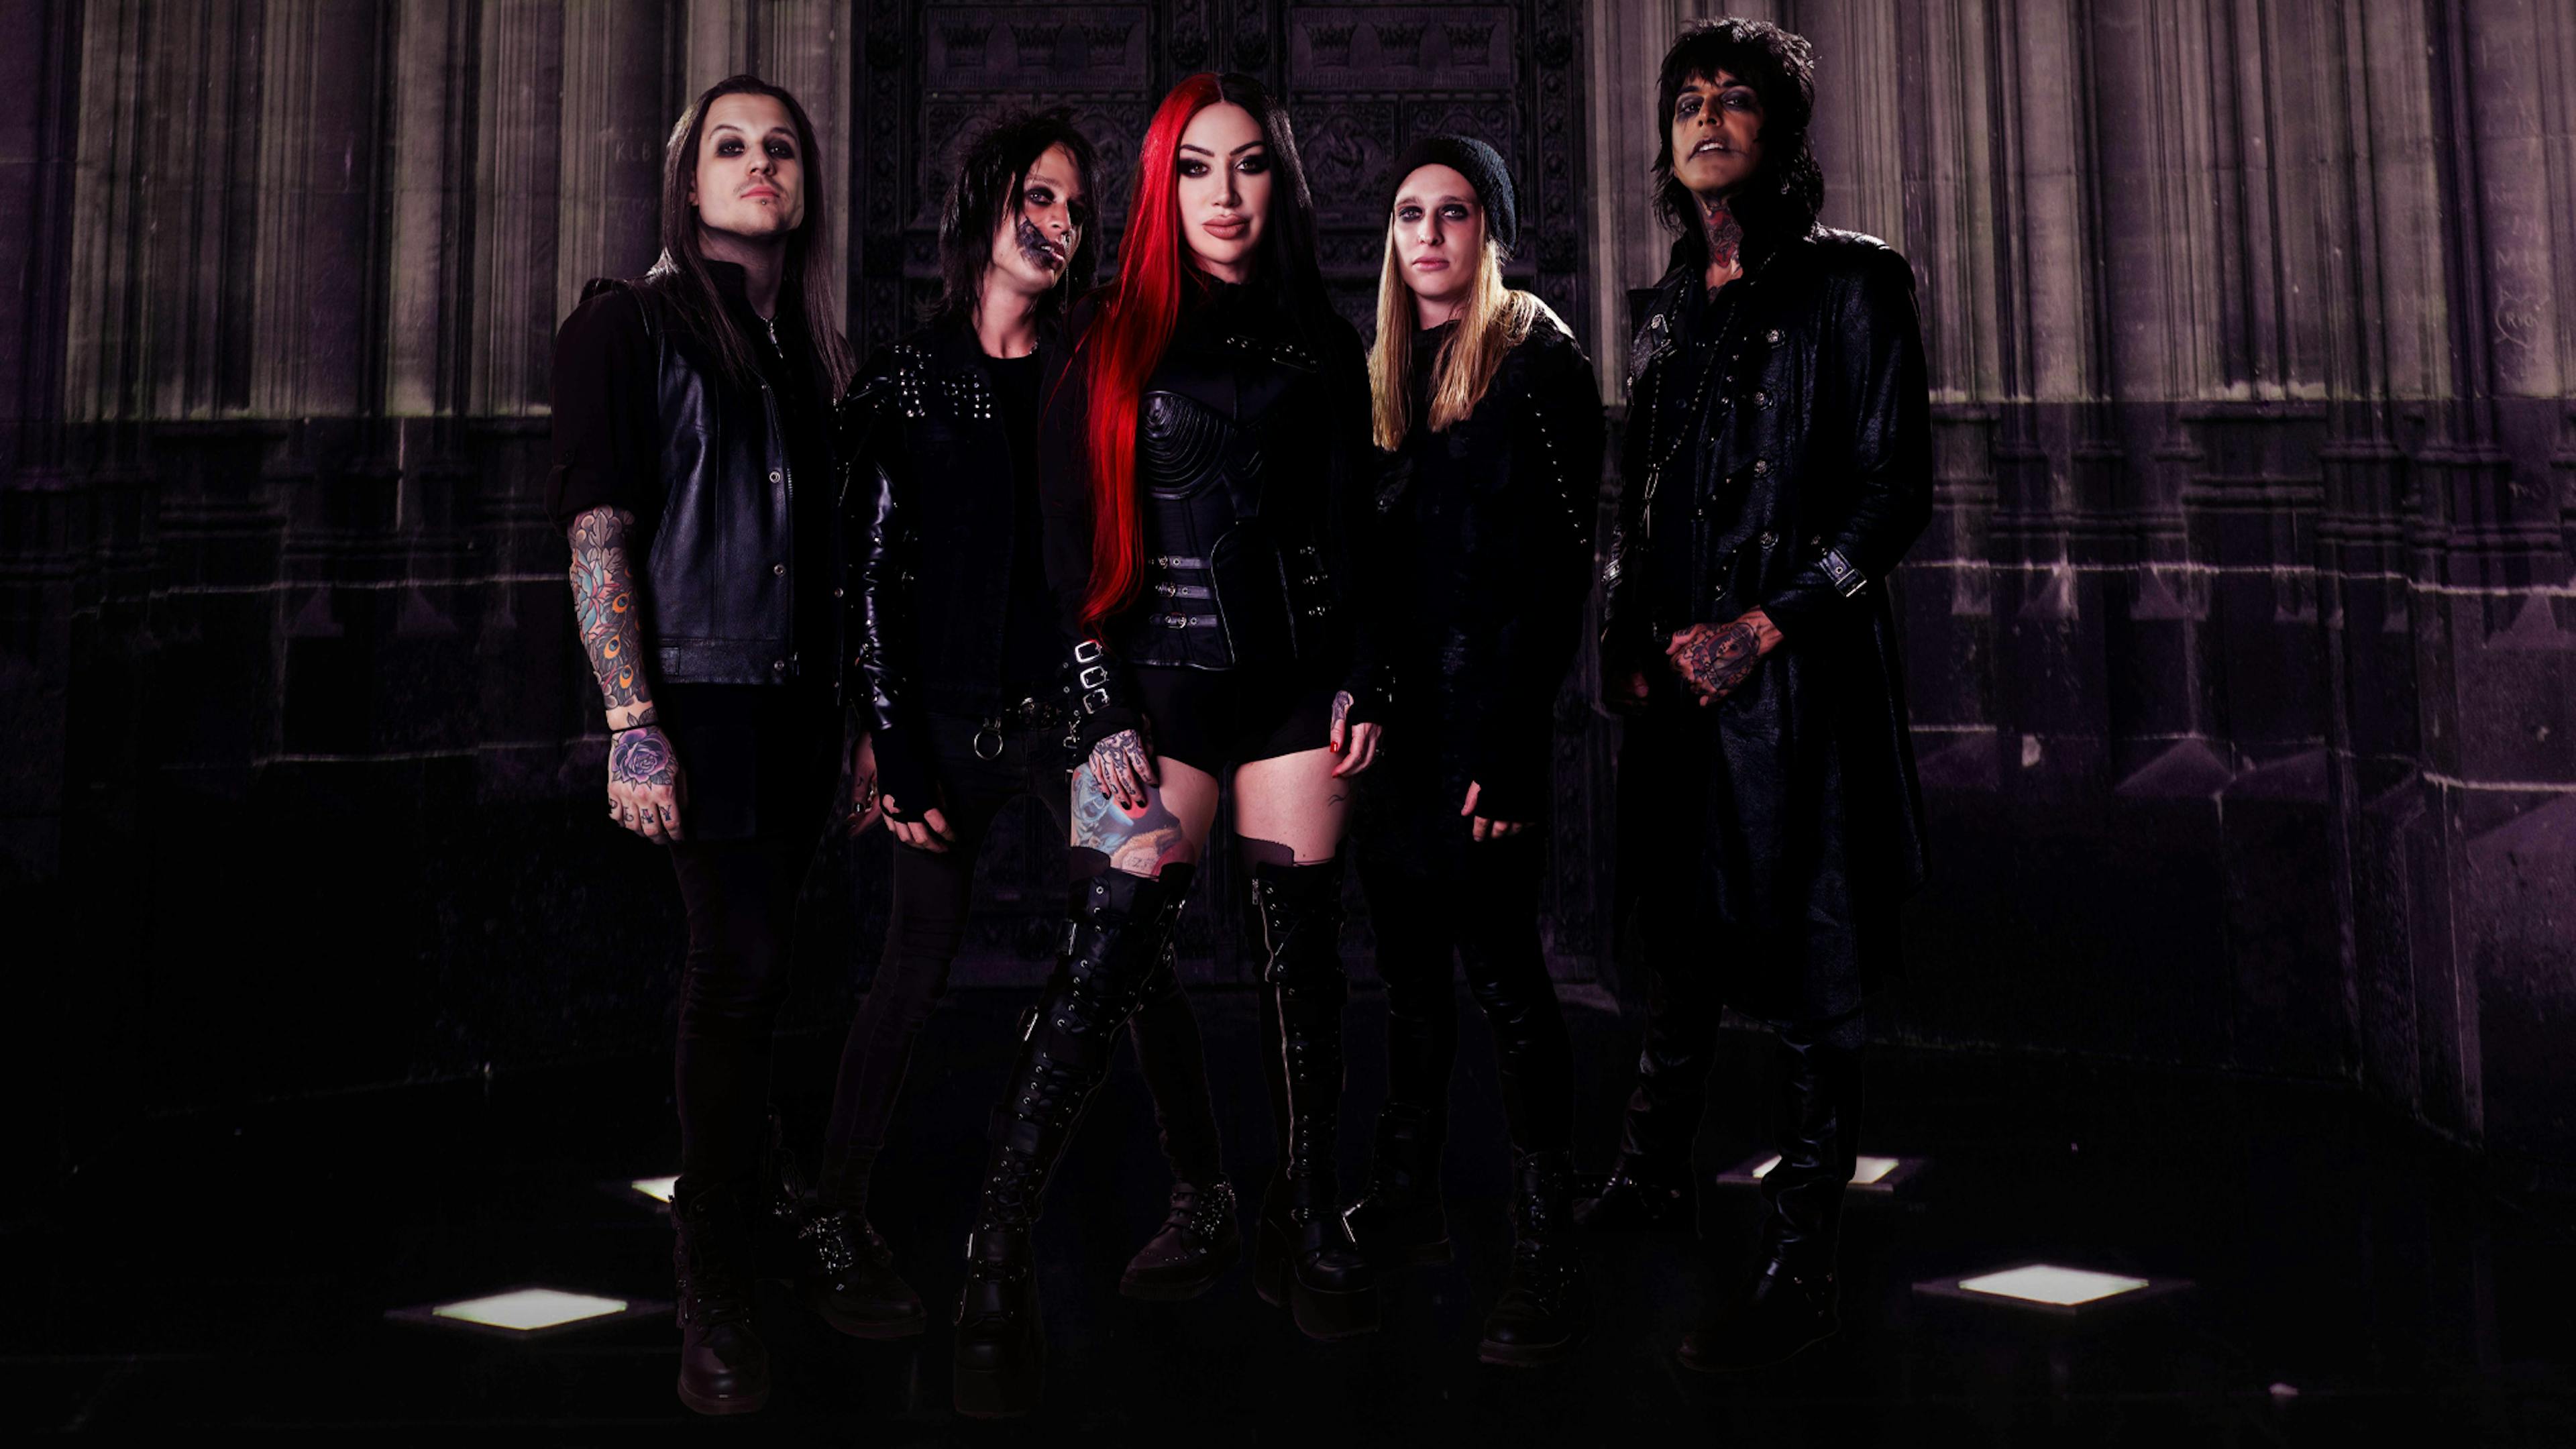 New Years Day release Ash Costello’s personal “anthem”, Half Black Heart